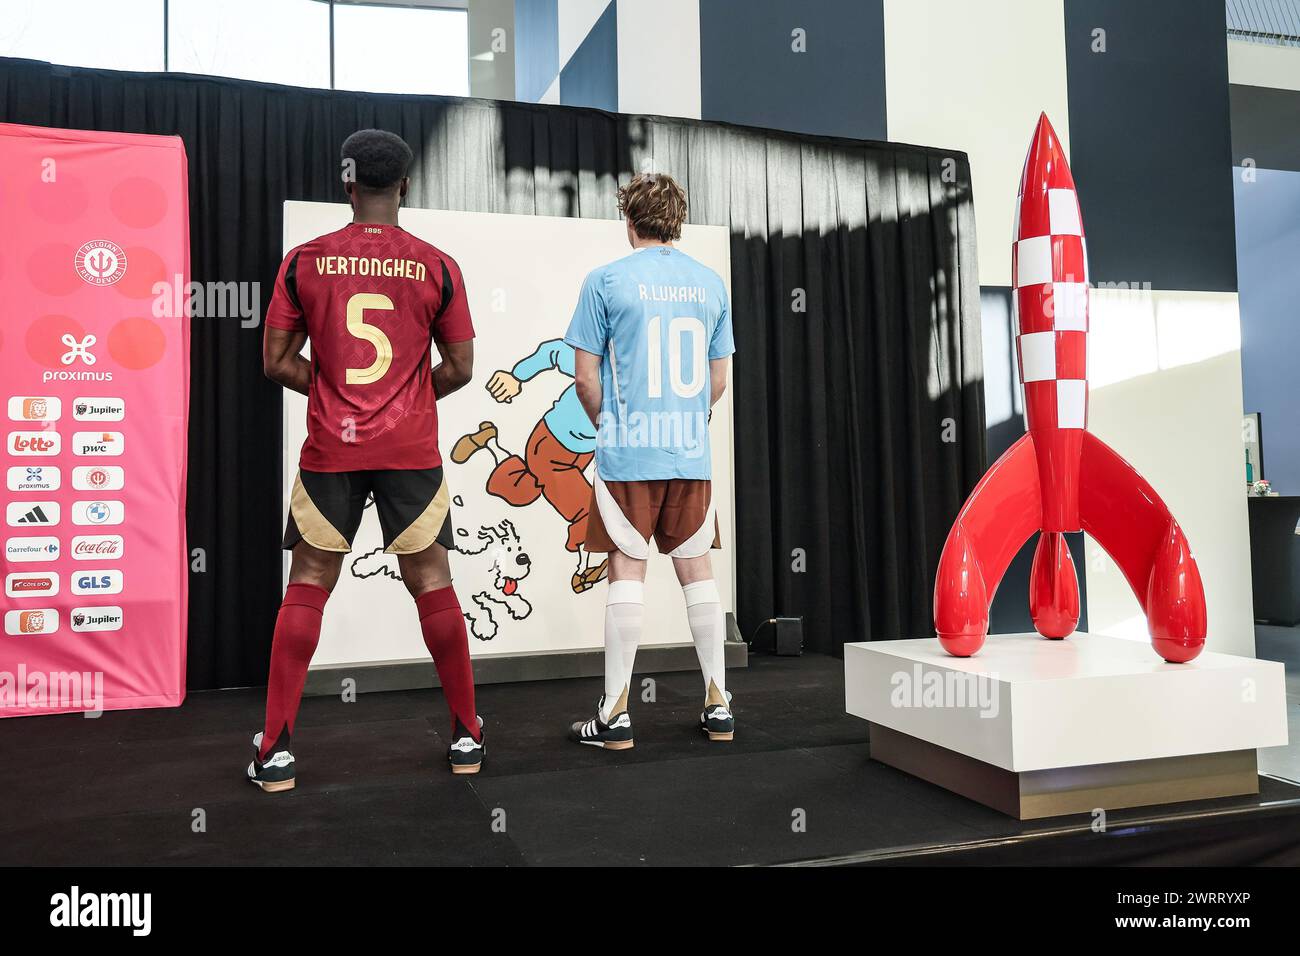 Louvain La Neuve, Belgium. 14th Mar, 2024. Two models show the home and away outfits, during a press conference of Belgian national soccer team Red Devils to present the new shirts for the UEFA Euro 2024 European Championship, Thursday 14 March 2024, at the Musee Herge in Louvain-la-Neuve. The new outfit, with light blue shirt with white collar, combined with brown shorts, refers to the iconic outfit of Kuifje - Tintin, the world-famous Belgian reporter-adventurer from the Herge comic books. BELGA PHOTO BRUNO FAHY Credit: Belga News Agency/Alamy Live News Stock Photo